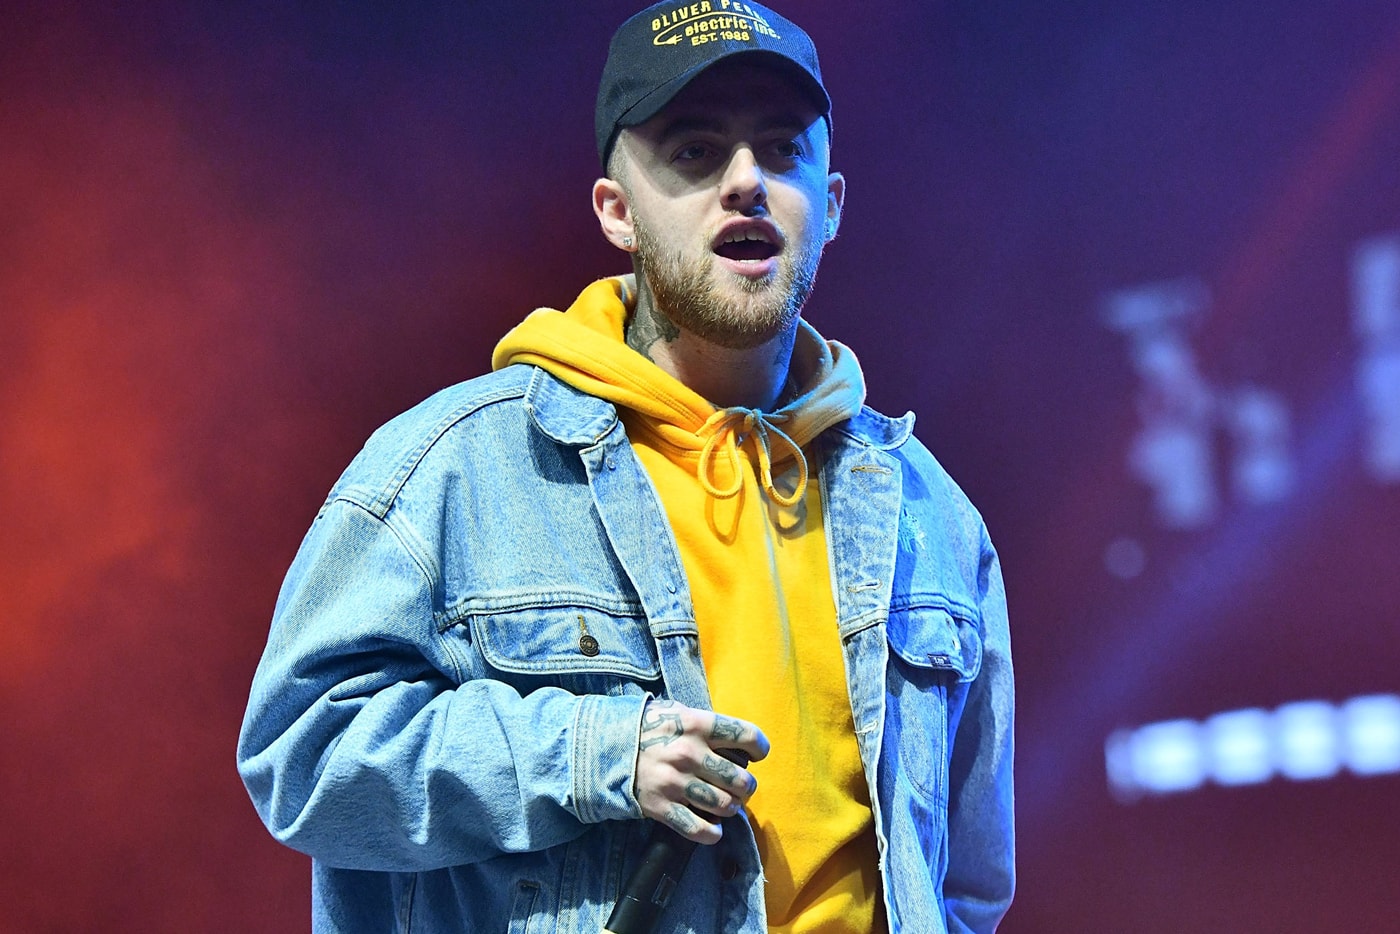 Mac Miller Swimming Album Release Date new 2018 details august 3 instagram video preview snippet music